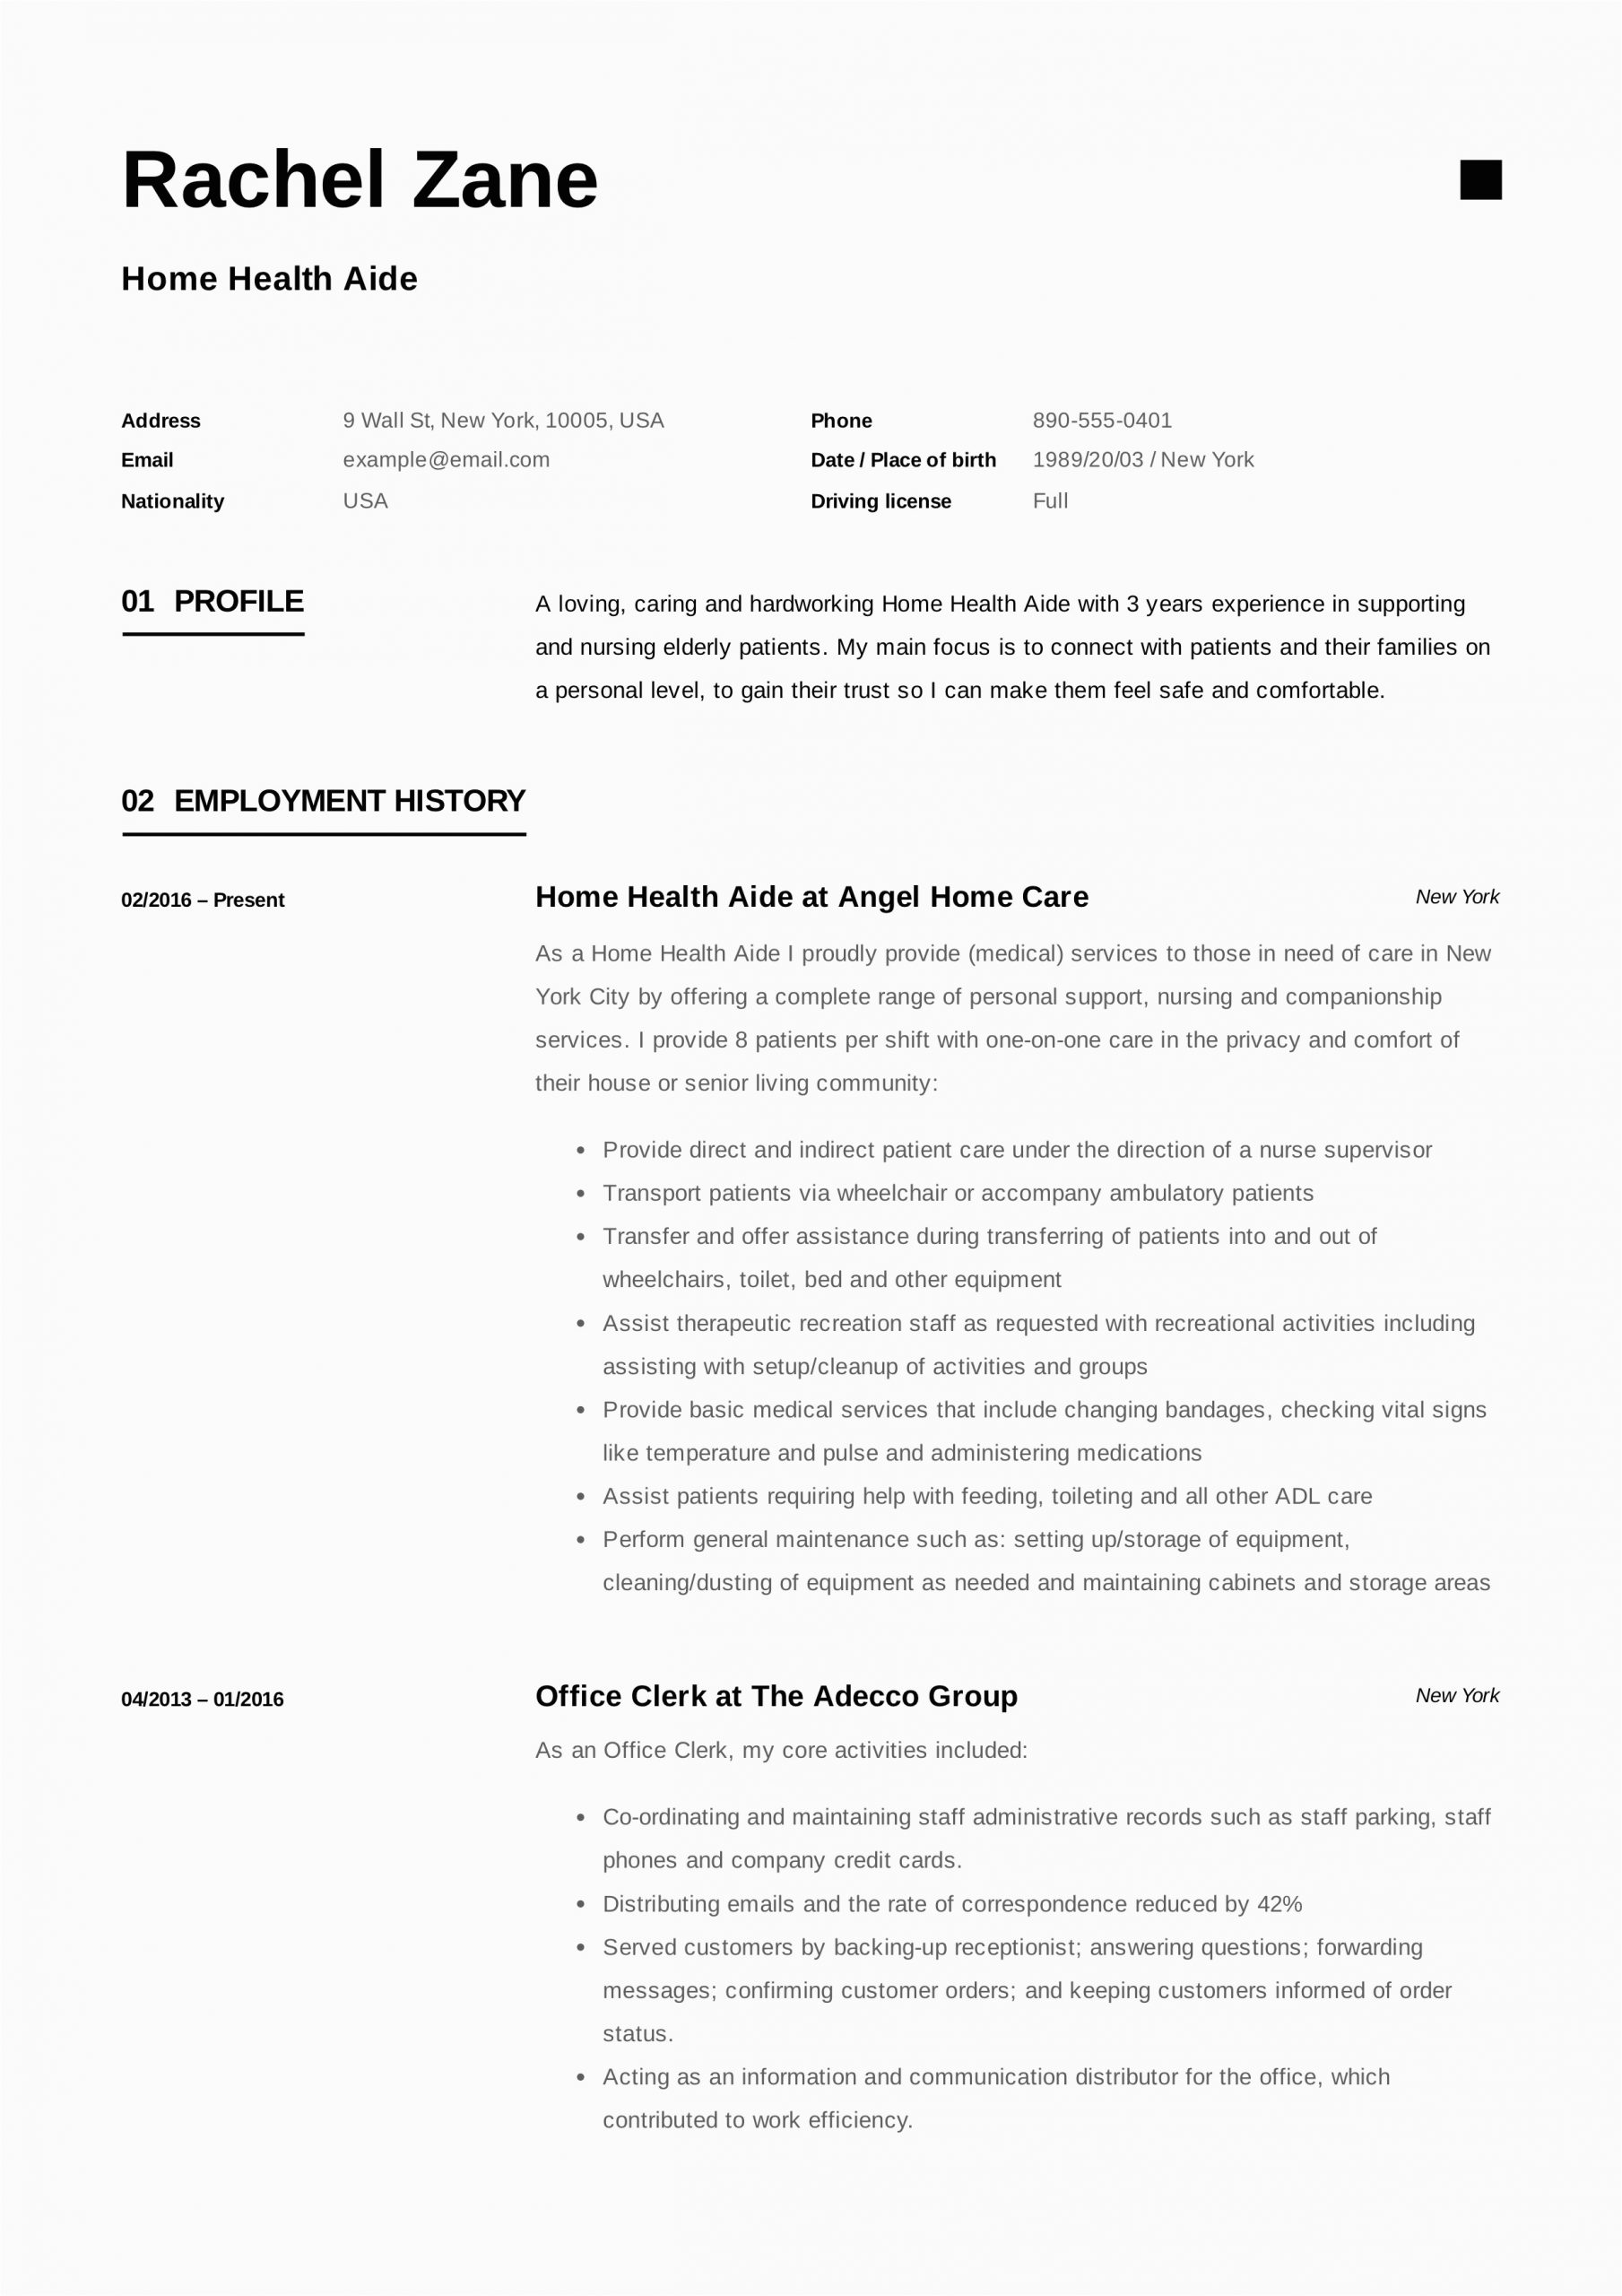 Home Health Aide Resume Objective Samples Home Health Aide Resume Sample & Writing Guide